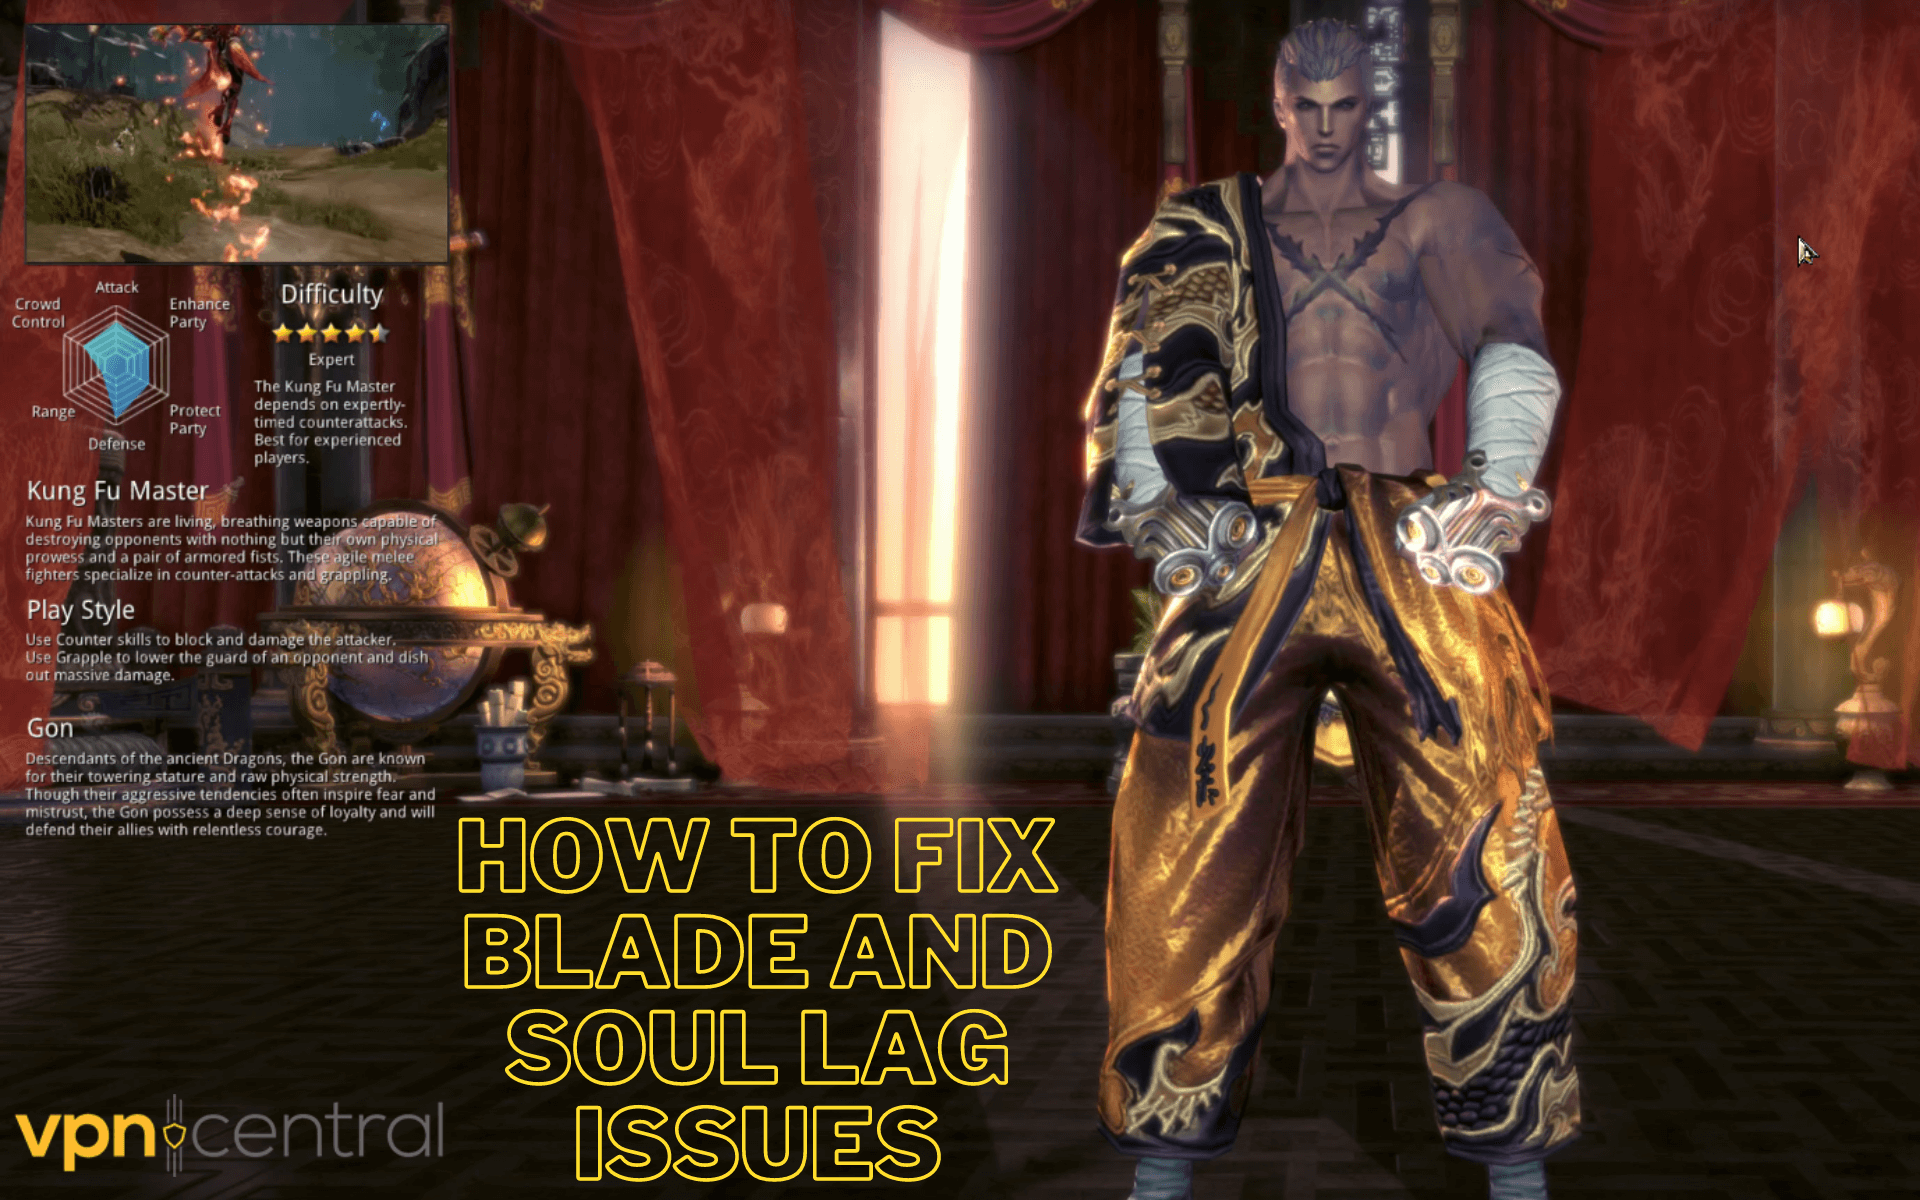 How to Fix Blade and Soul Lag Issues